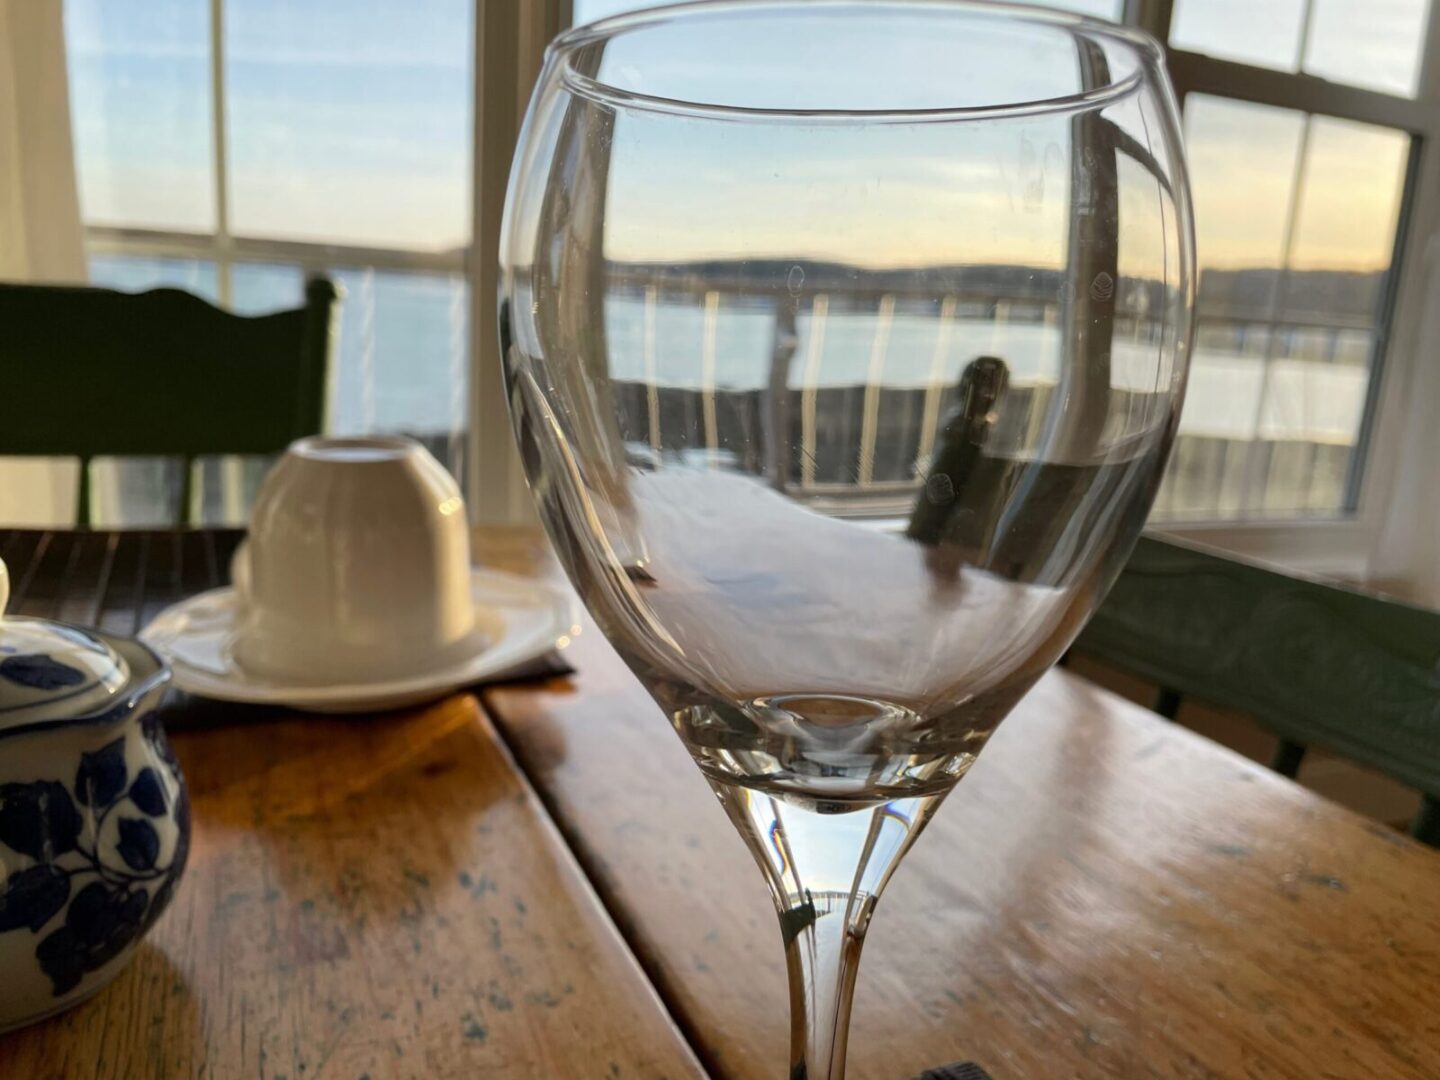 A wine glass on a table with a view of the ocean.